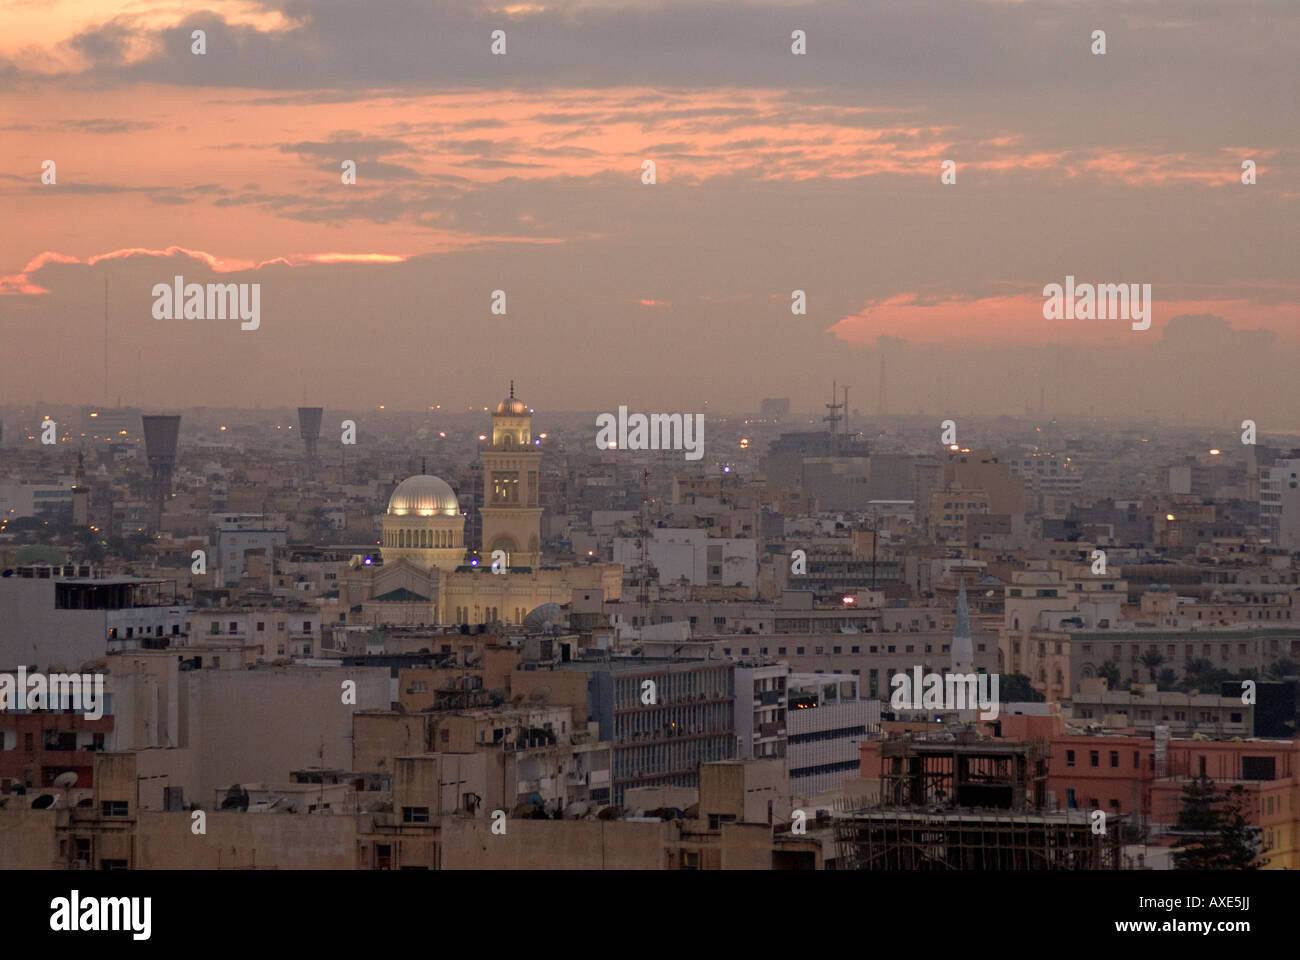 General view over the city of Tripoli Libya Stock Photo